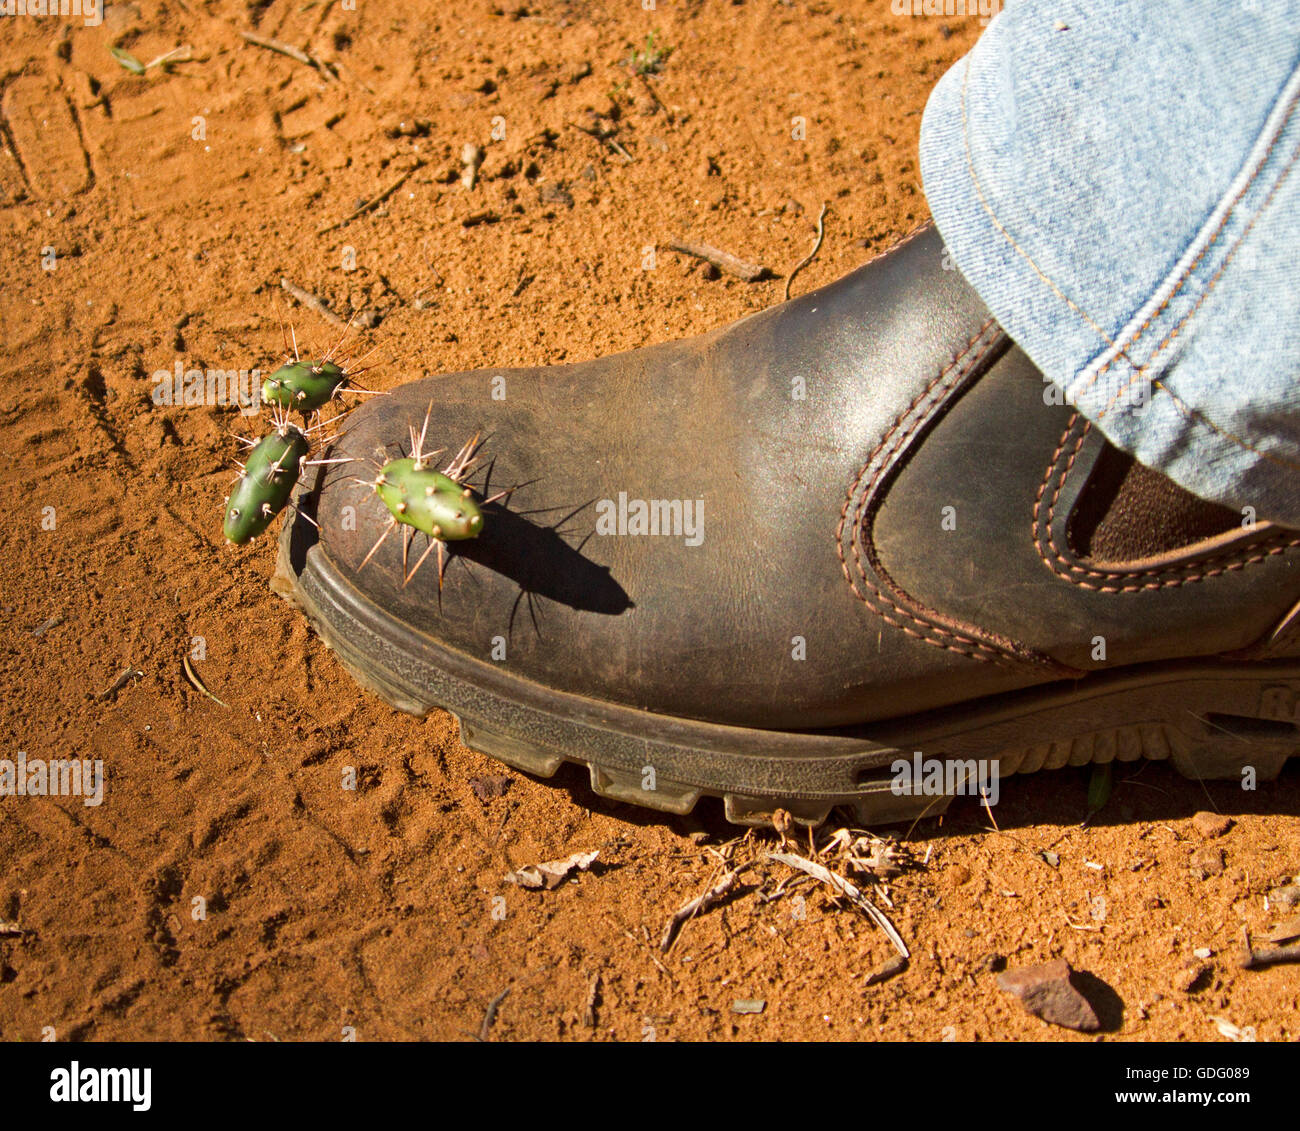 Segments of prickly pear / opuntia cactus stuck into leather boot on man's foot, natural method of spreading invasive weed, a declared pest species Stock Photo